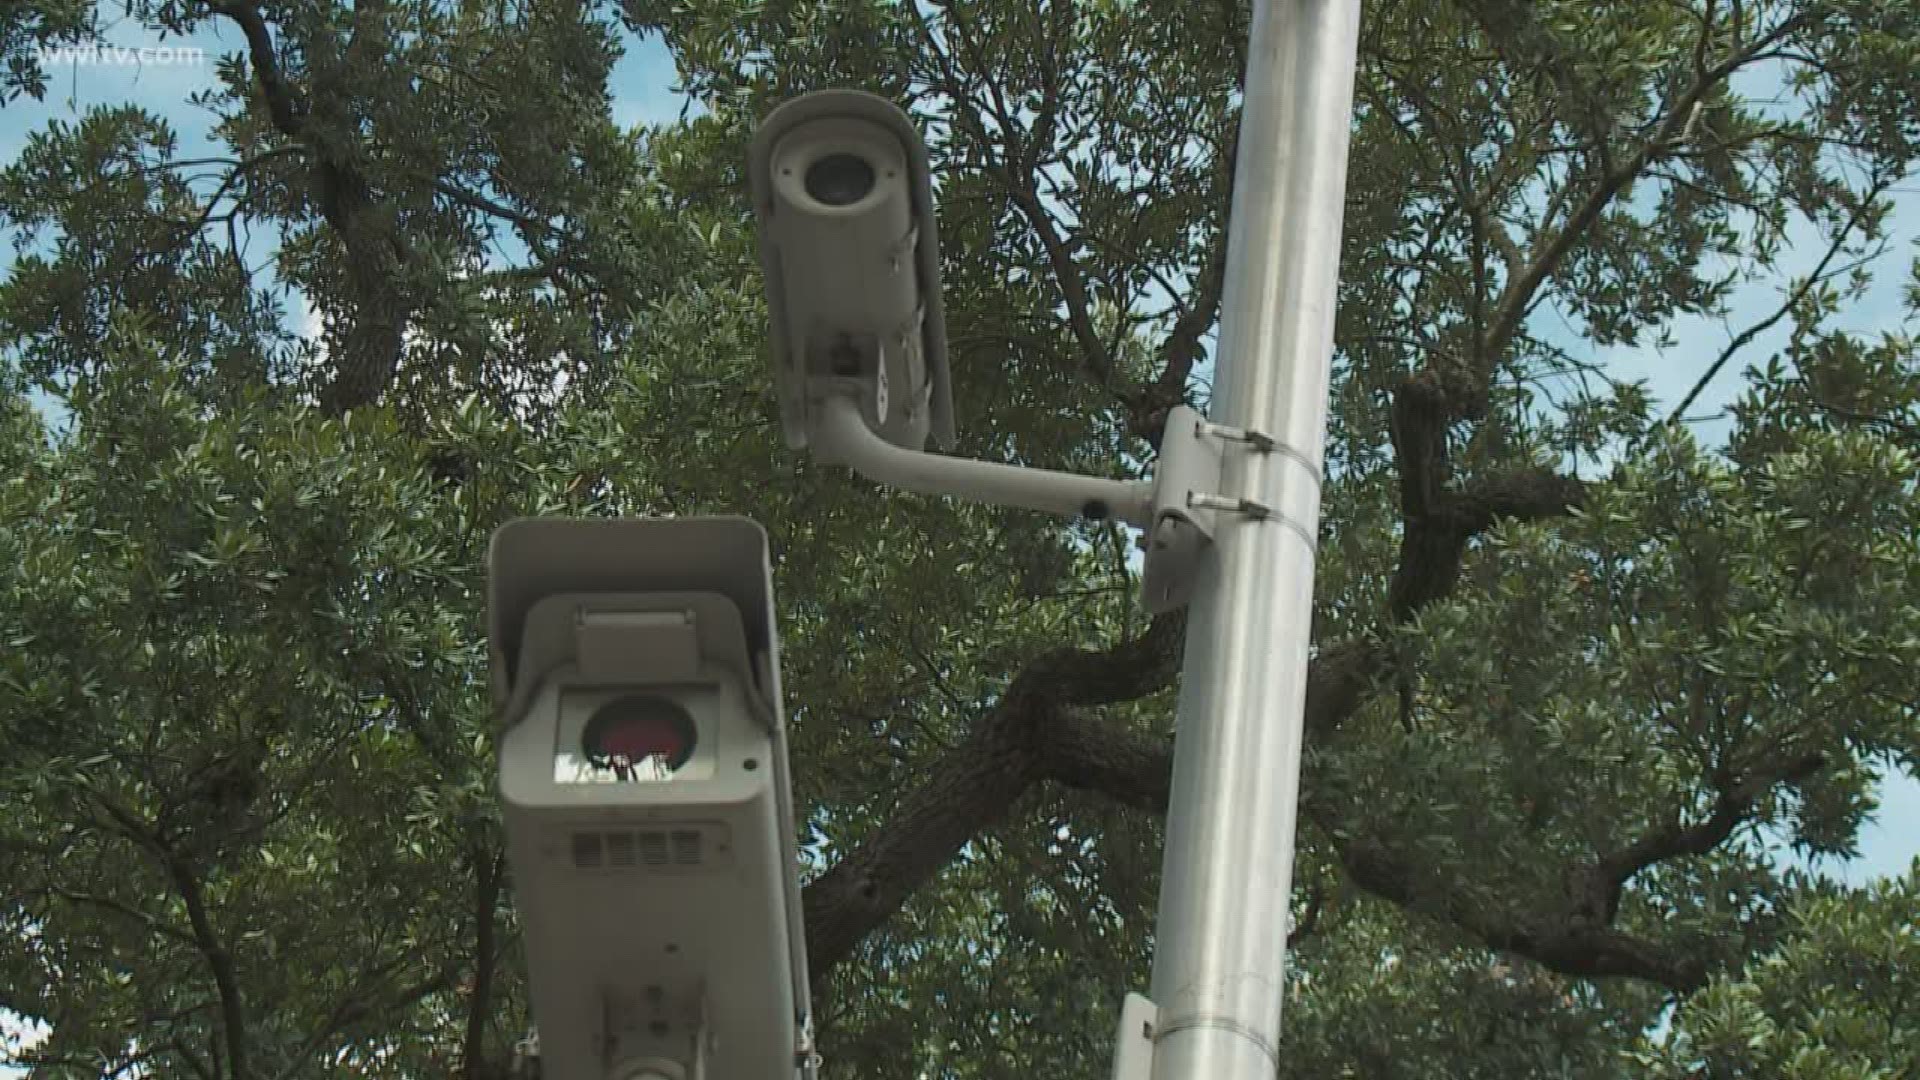 However, in a Transition Report released Thursday, Cantrell's Government Operations Committee is recommending keeping some traffic cameras.